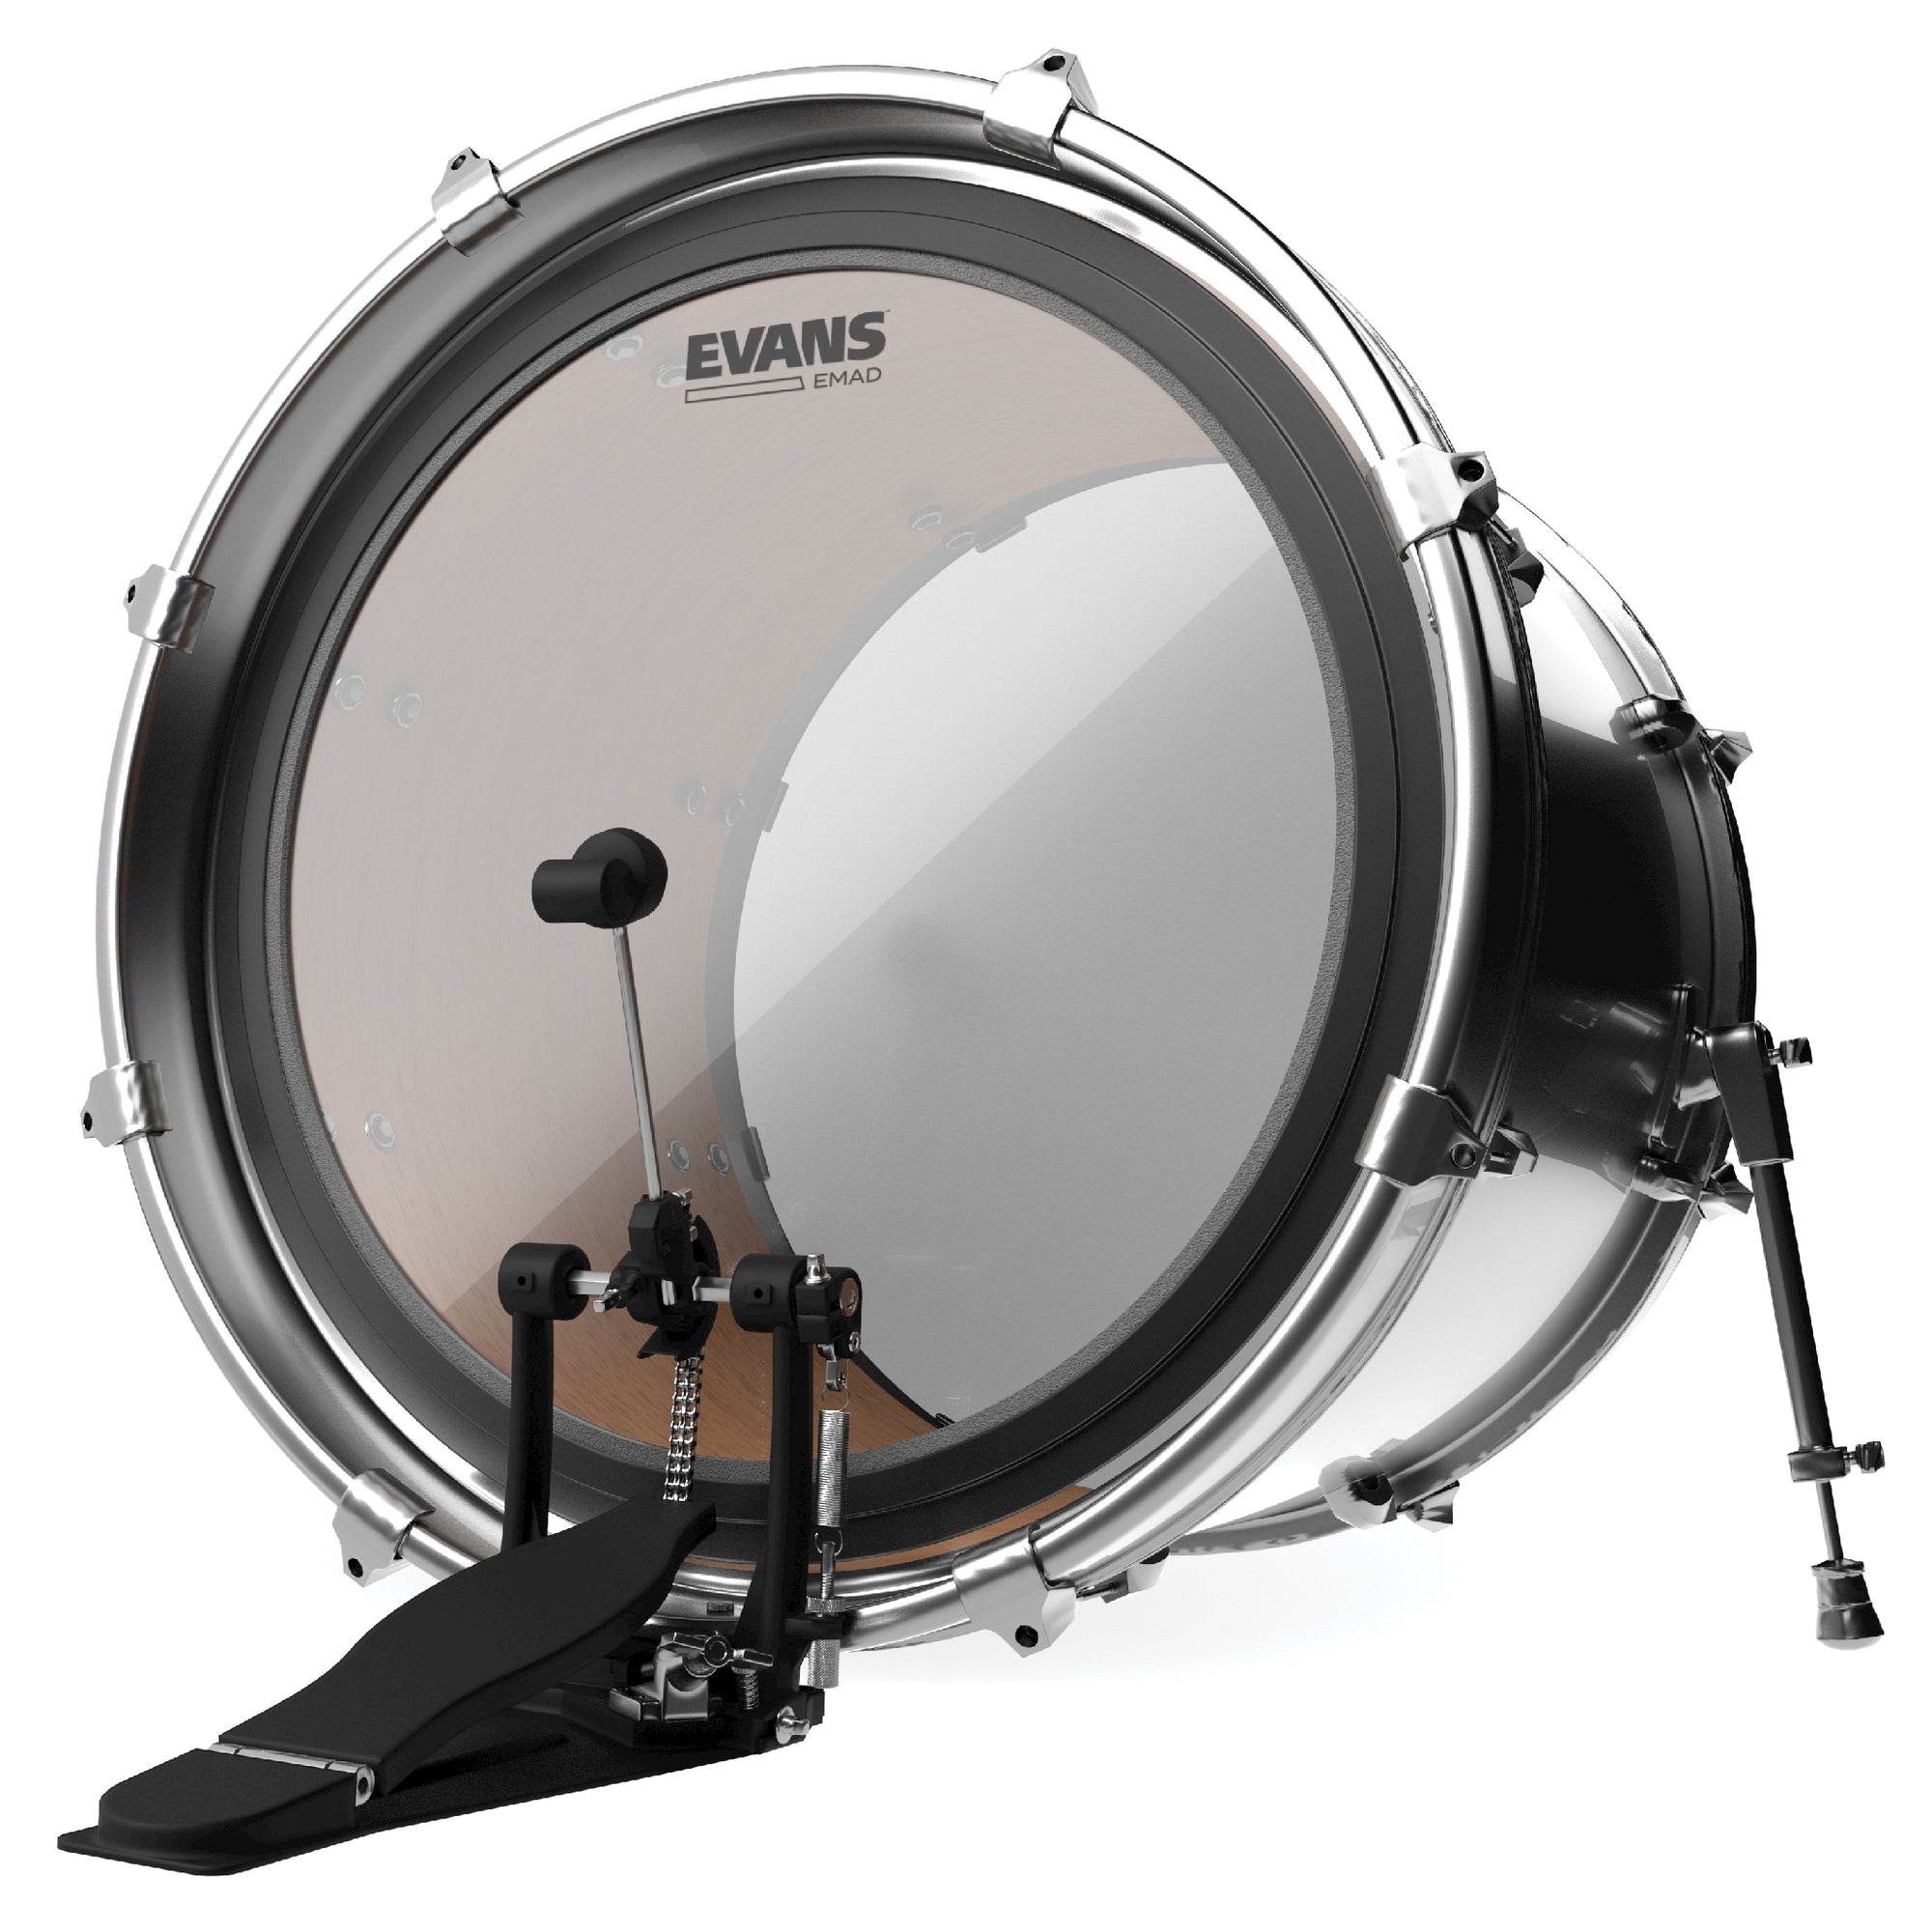 Evans BD22EMAD 22" EMAD Clear 1ply Bass Batter Head BD22EMAD